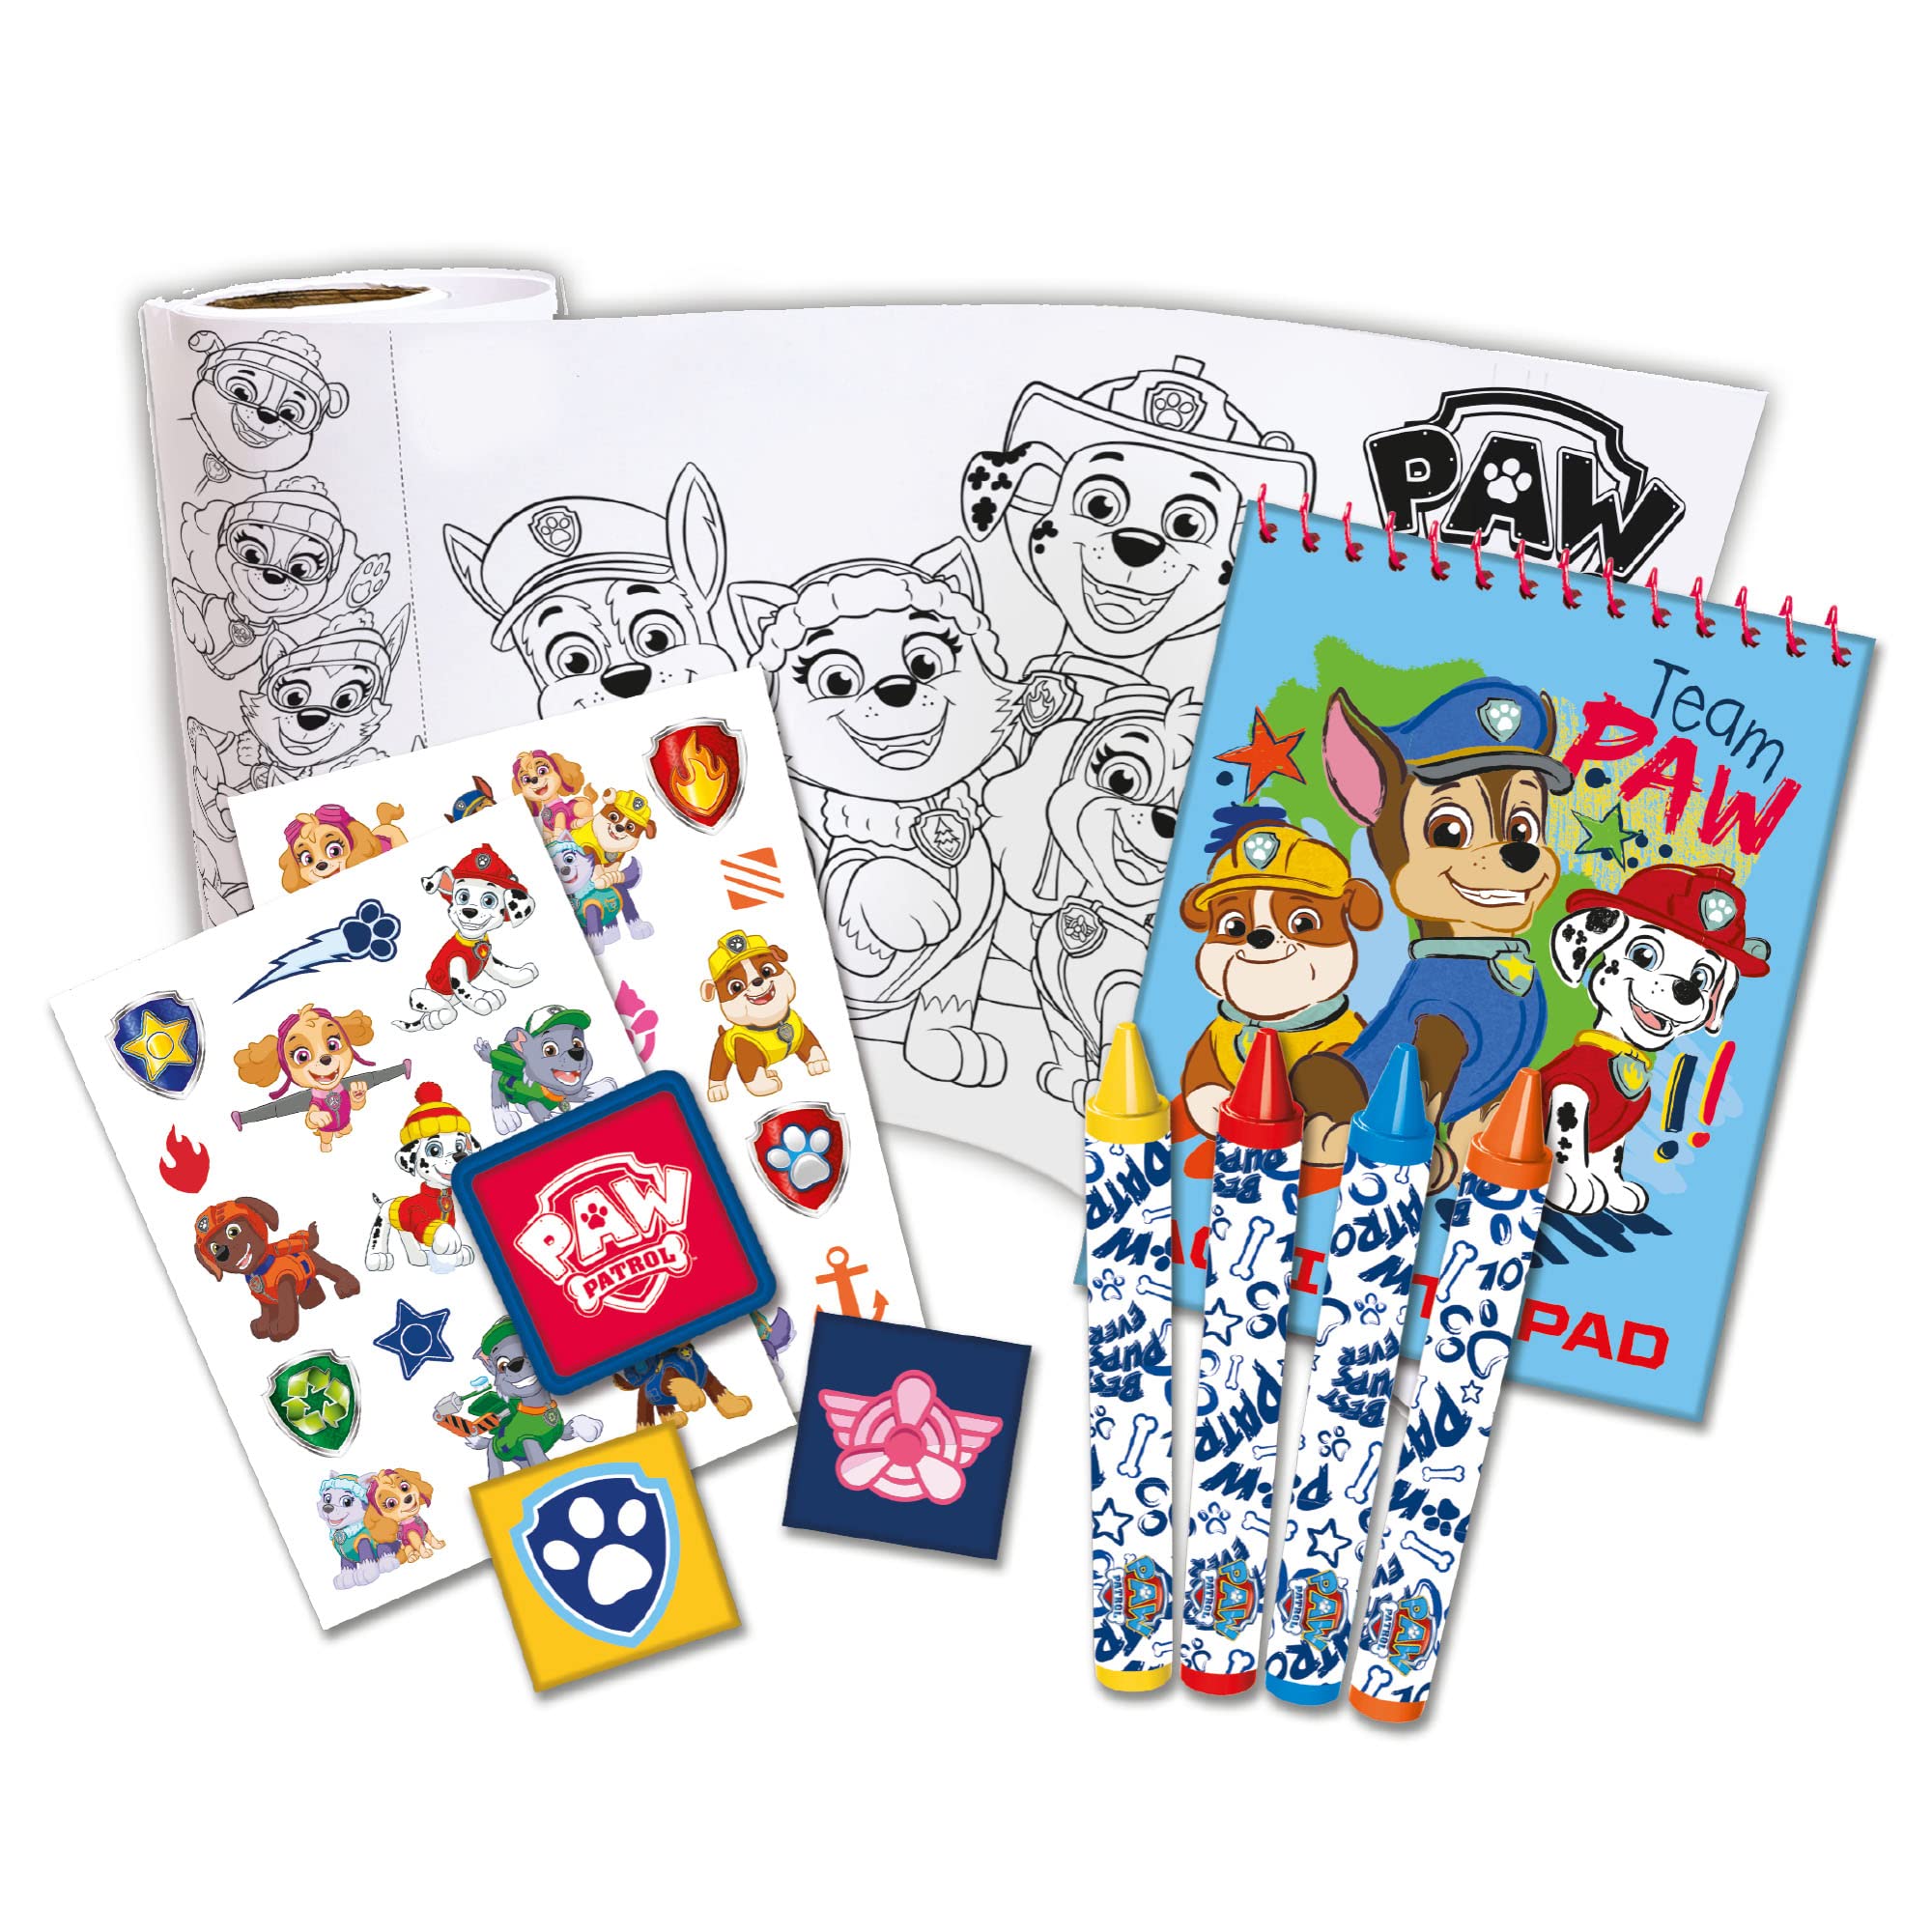 Tara Toy Paw Patrol My Own Creativity Set - Spark Creative Expression in Kids, Ages 3 & Up, Multi-Purpose Arts & Crafts Kit for Boys and Girls. Create, Craft, and Imagine with This All-Inclusive Set